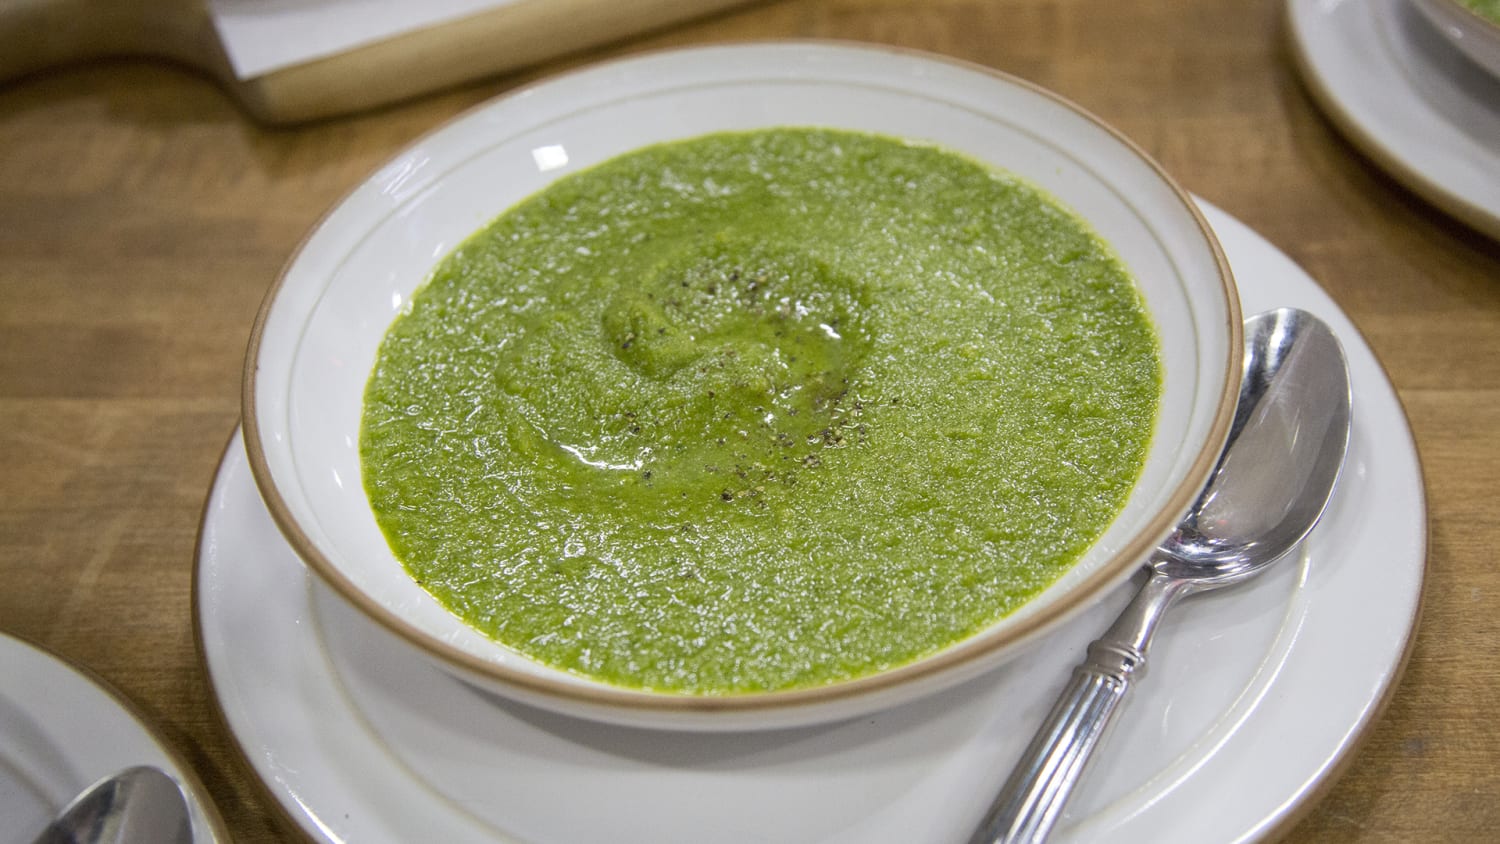 https://media-cldnry.s-nbcnews.com/image/upload/newscms/2018_10/1322592/green-soup-today-tease-180306.jpg